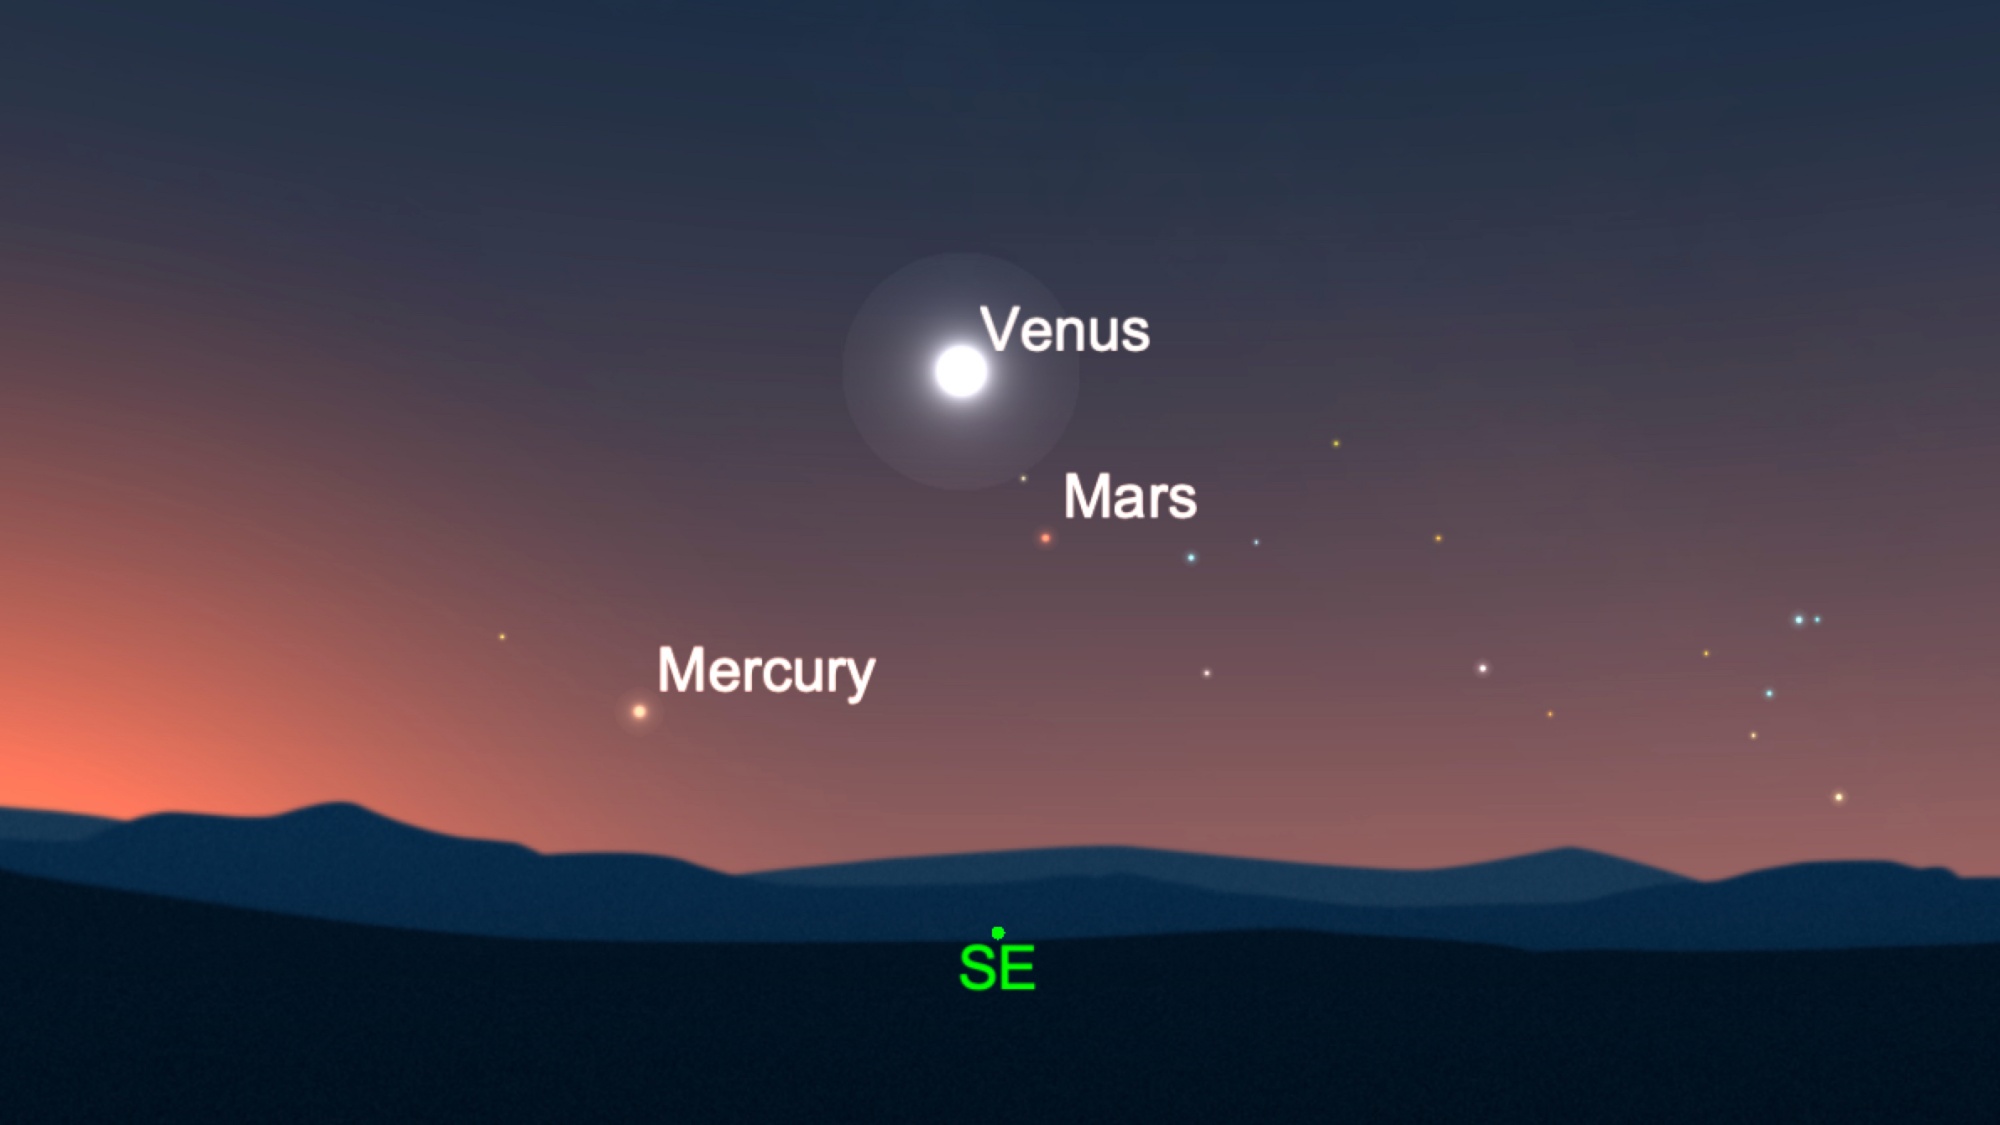 This sky map shows the positions of Mercury, Venus, and Mars in the morning sky on the day of the full moon.